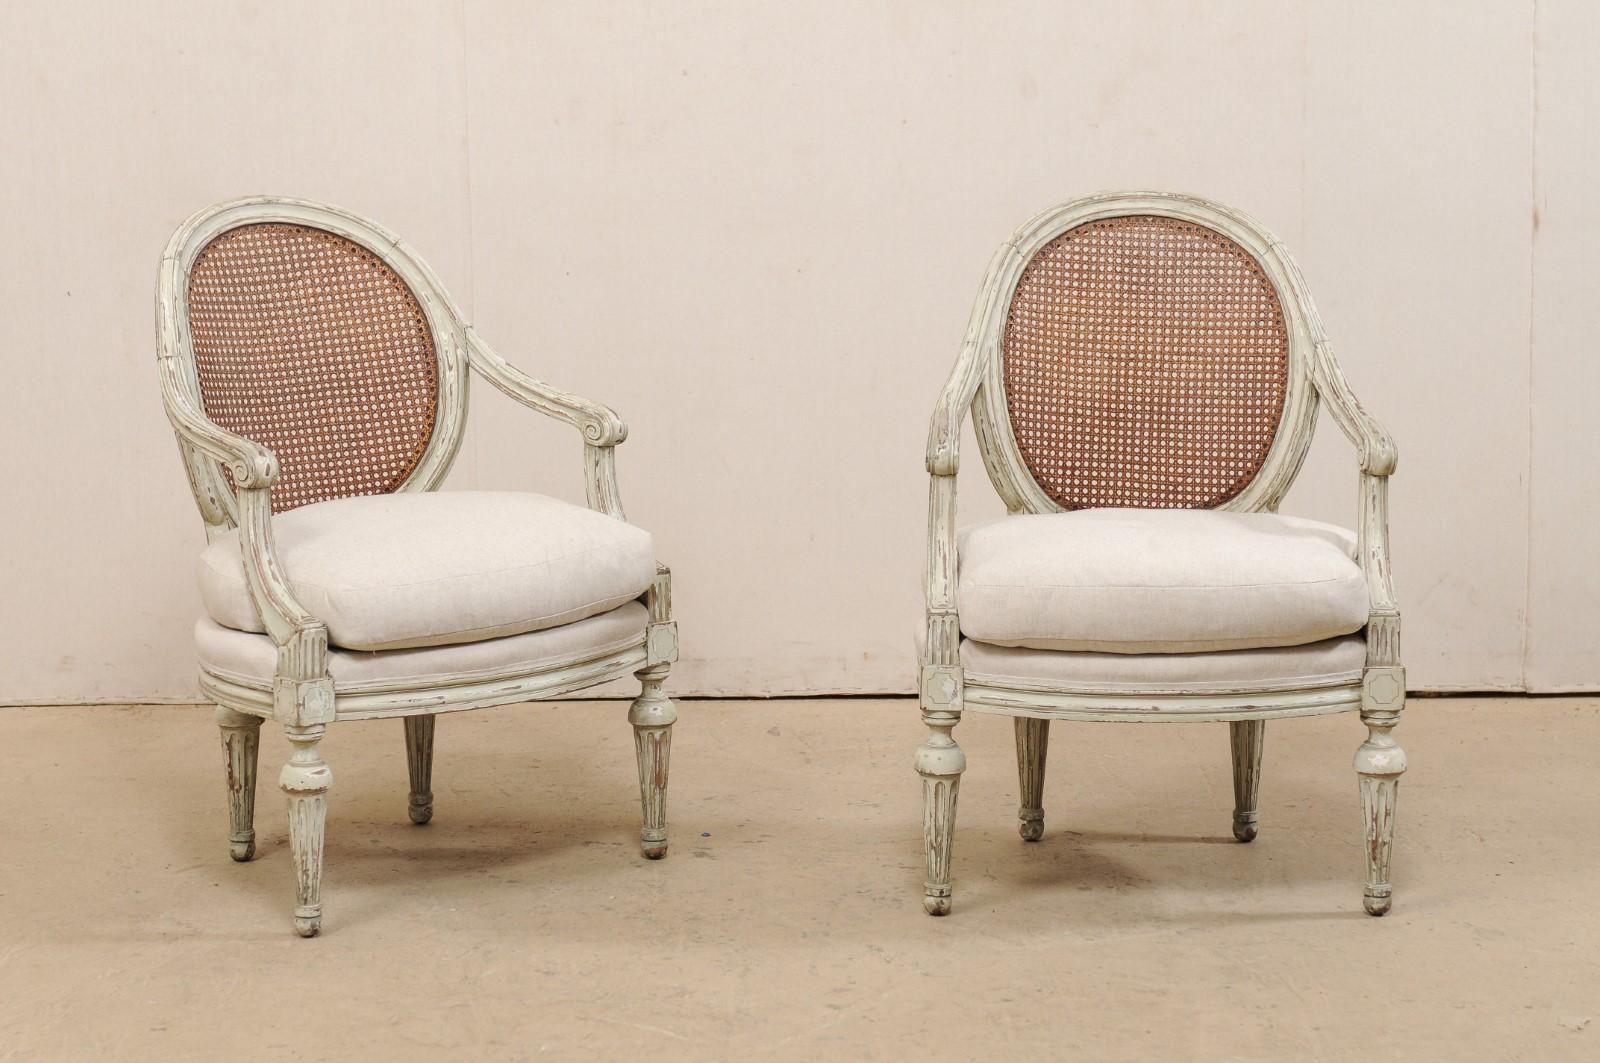 A French pair of Louis XVI style round cane-back and upholstered seat armchairs from the 19th century. This pair of bergères chairs from France each features a rounded back, handwoven with cane, beautifully scrolled knuckles at the end of